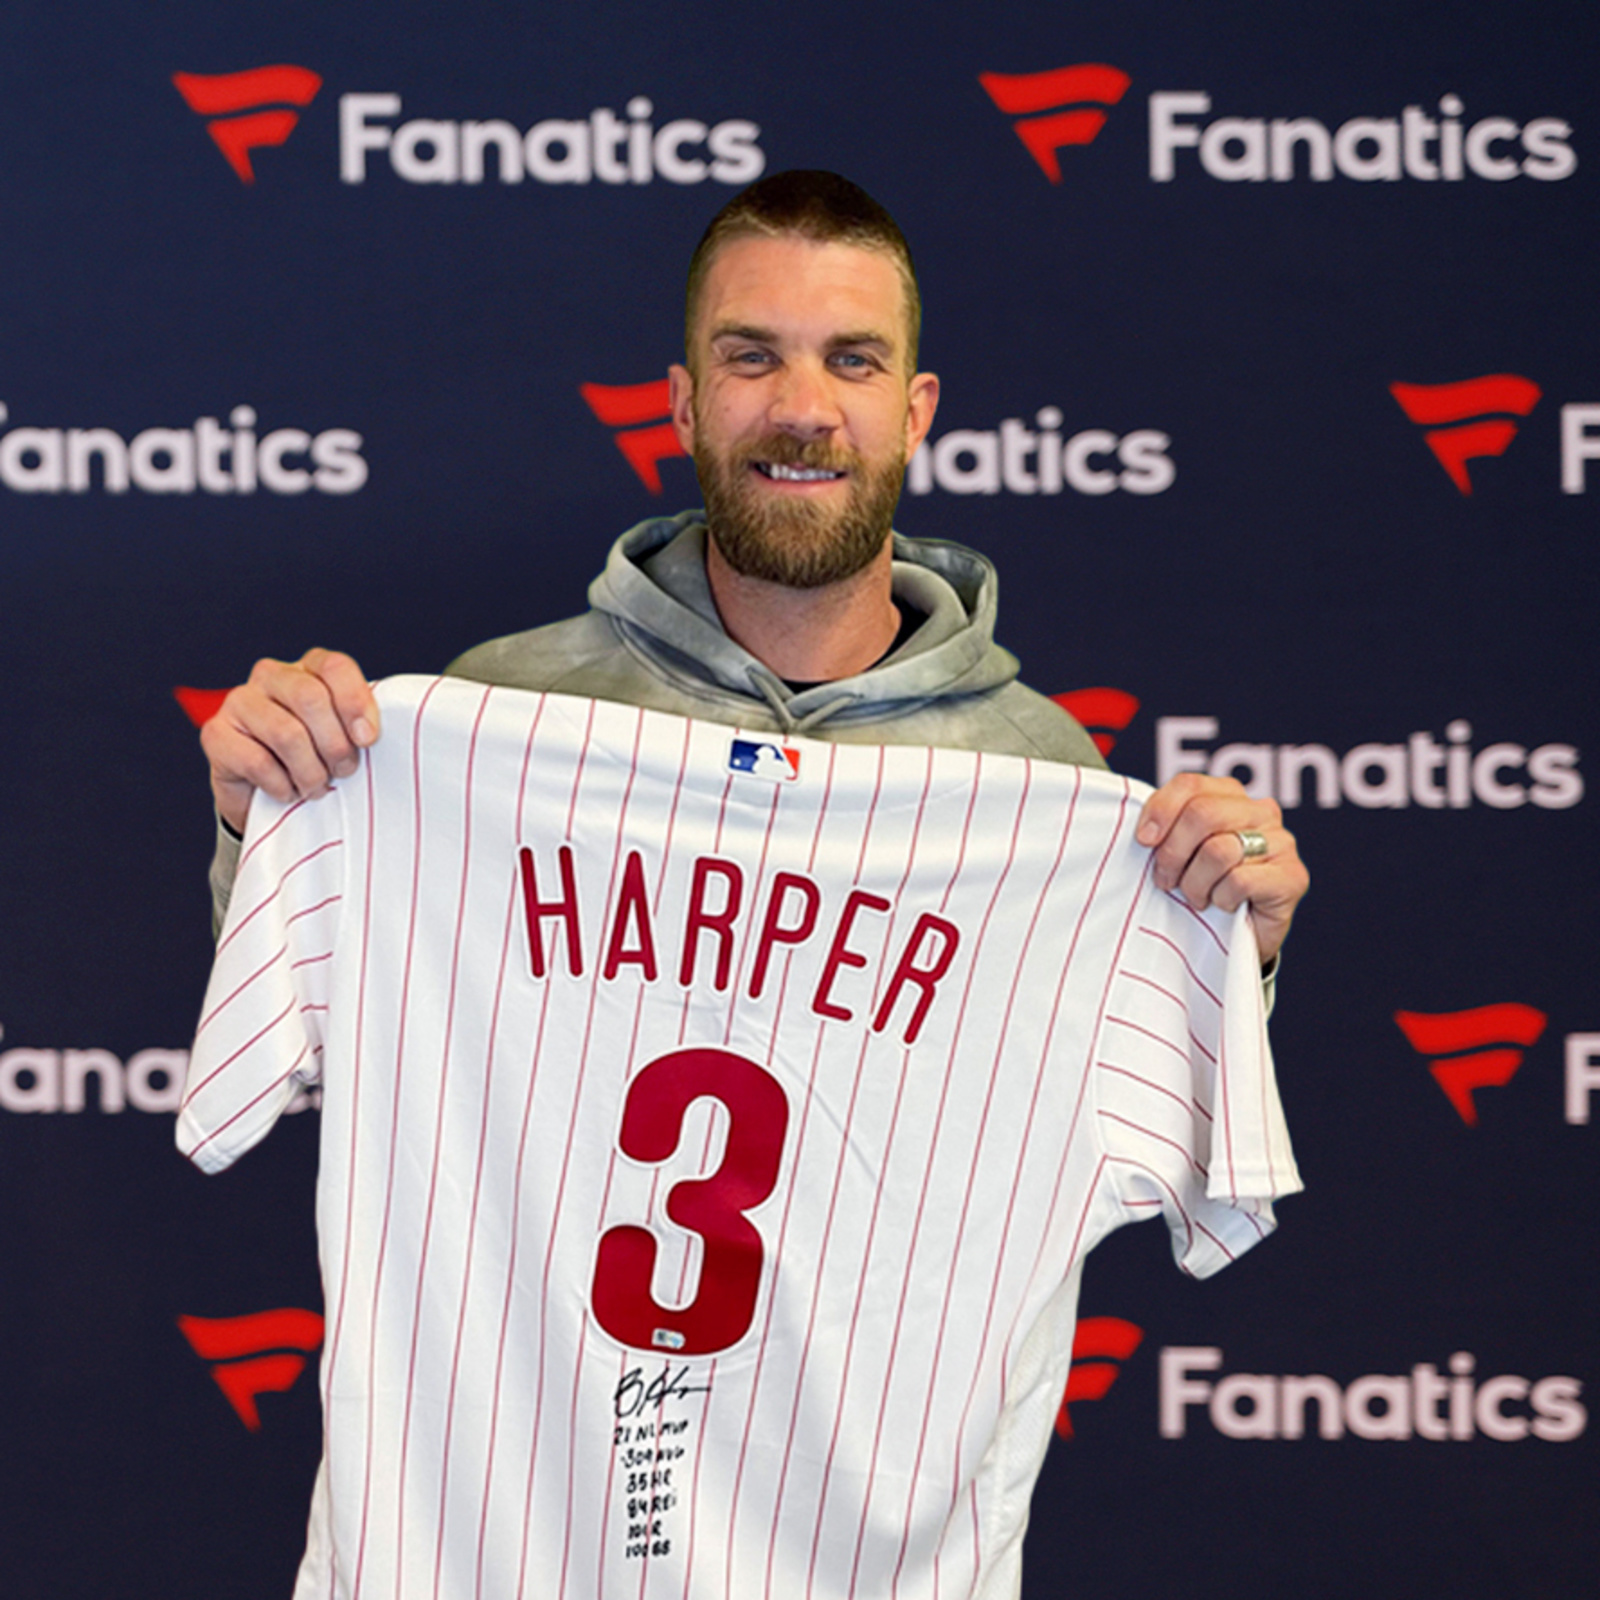 Watch: MLB All Star, Bryce Harper Teases About Switching to